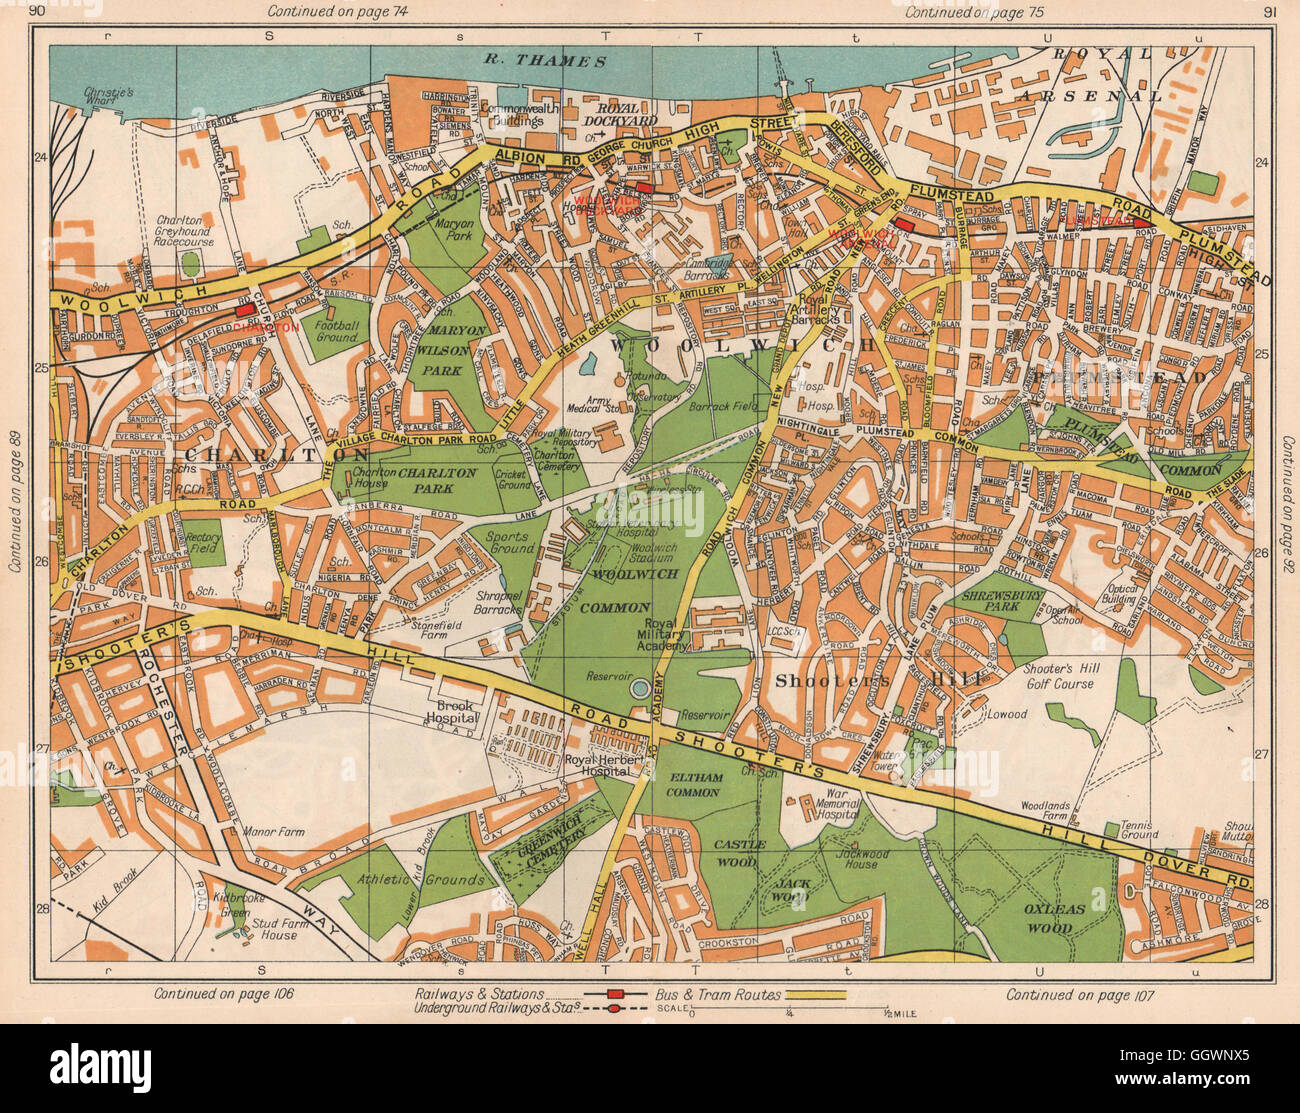 SE LONDON Woolwich Charlton Charlton Plumstead, Kidbrooke Shooters Hill 1938 map Banque D'Images